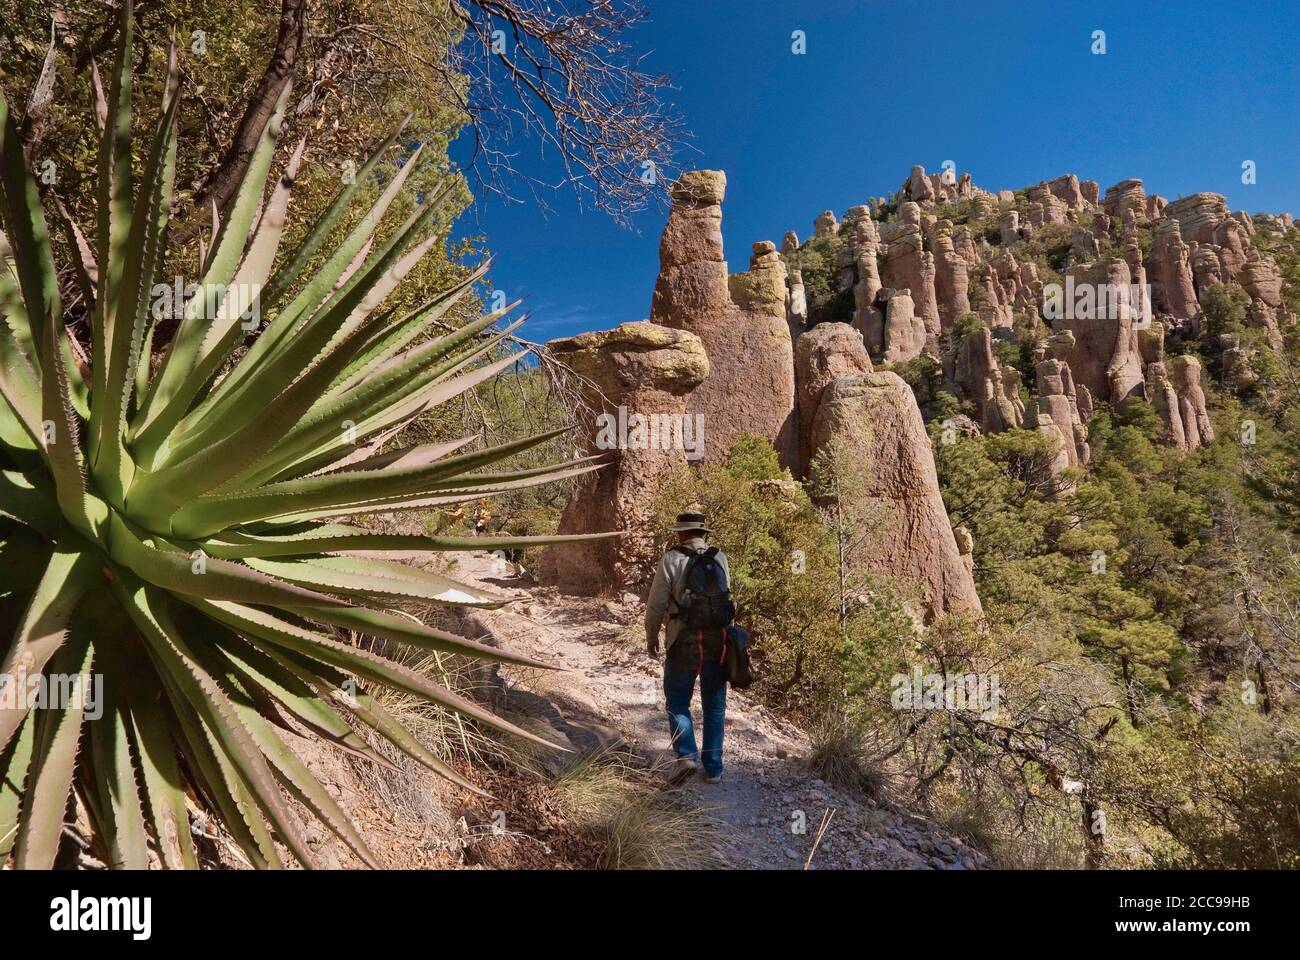 Common Sotol (Desert Spoon) plant, rock pinnacles and hiker on Hailstone Trail in Chiricahua National Monument, Arizona, USA Stock Photo